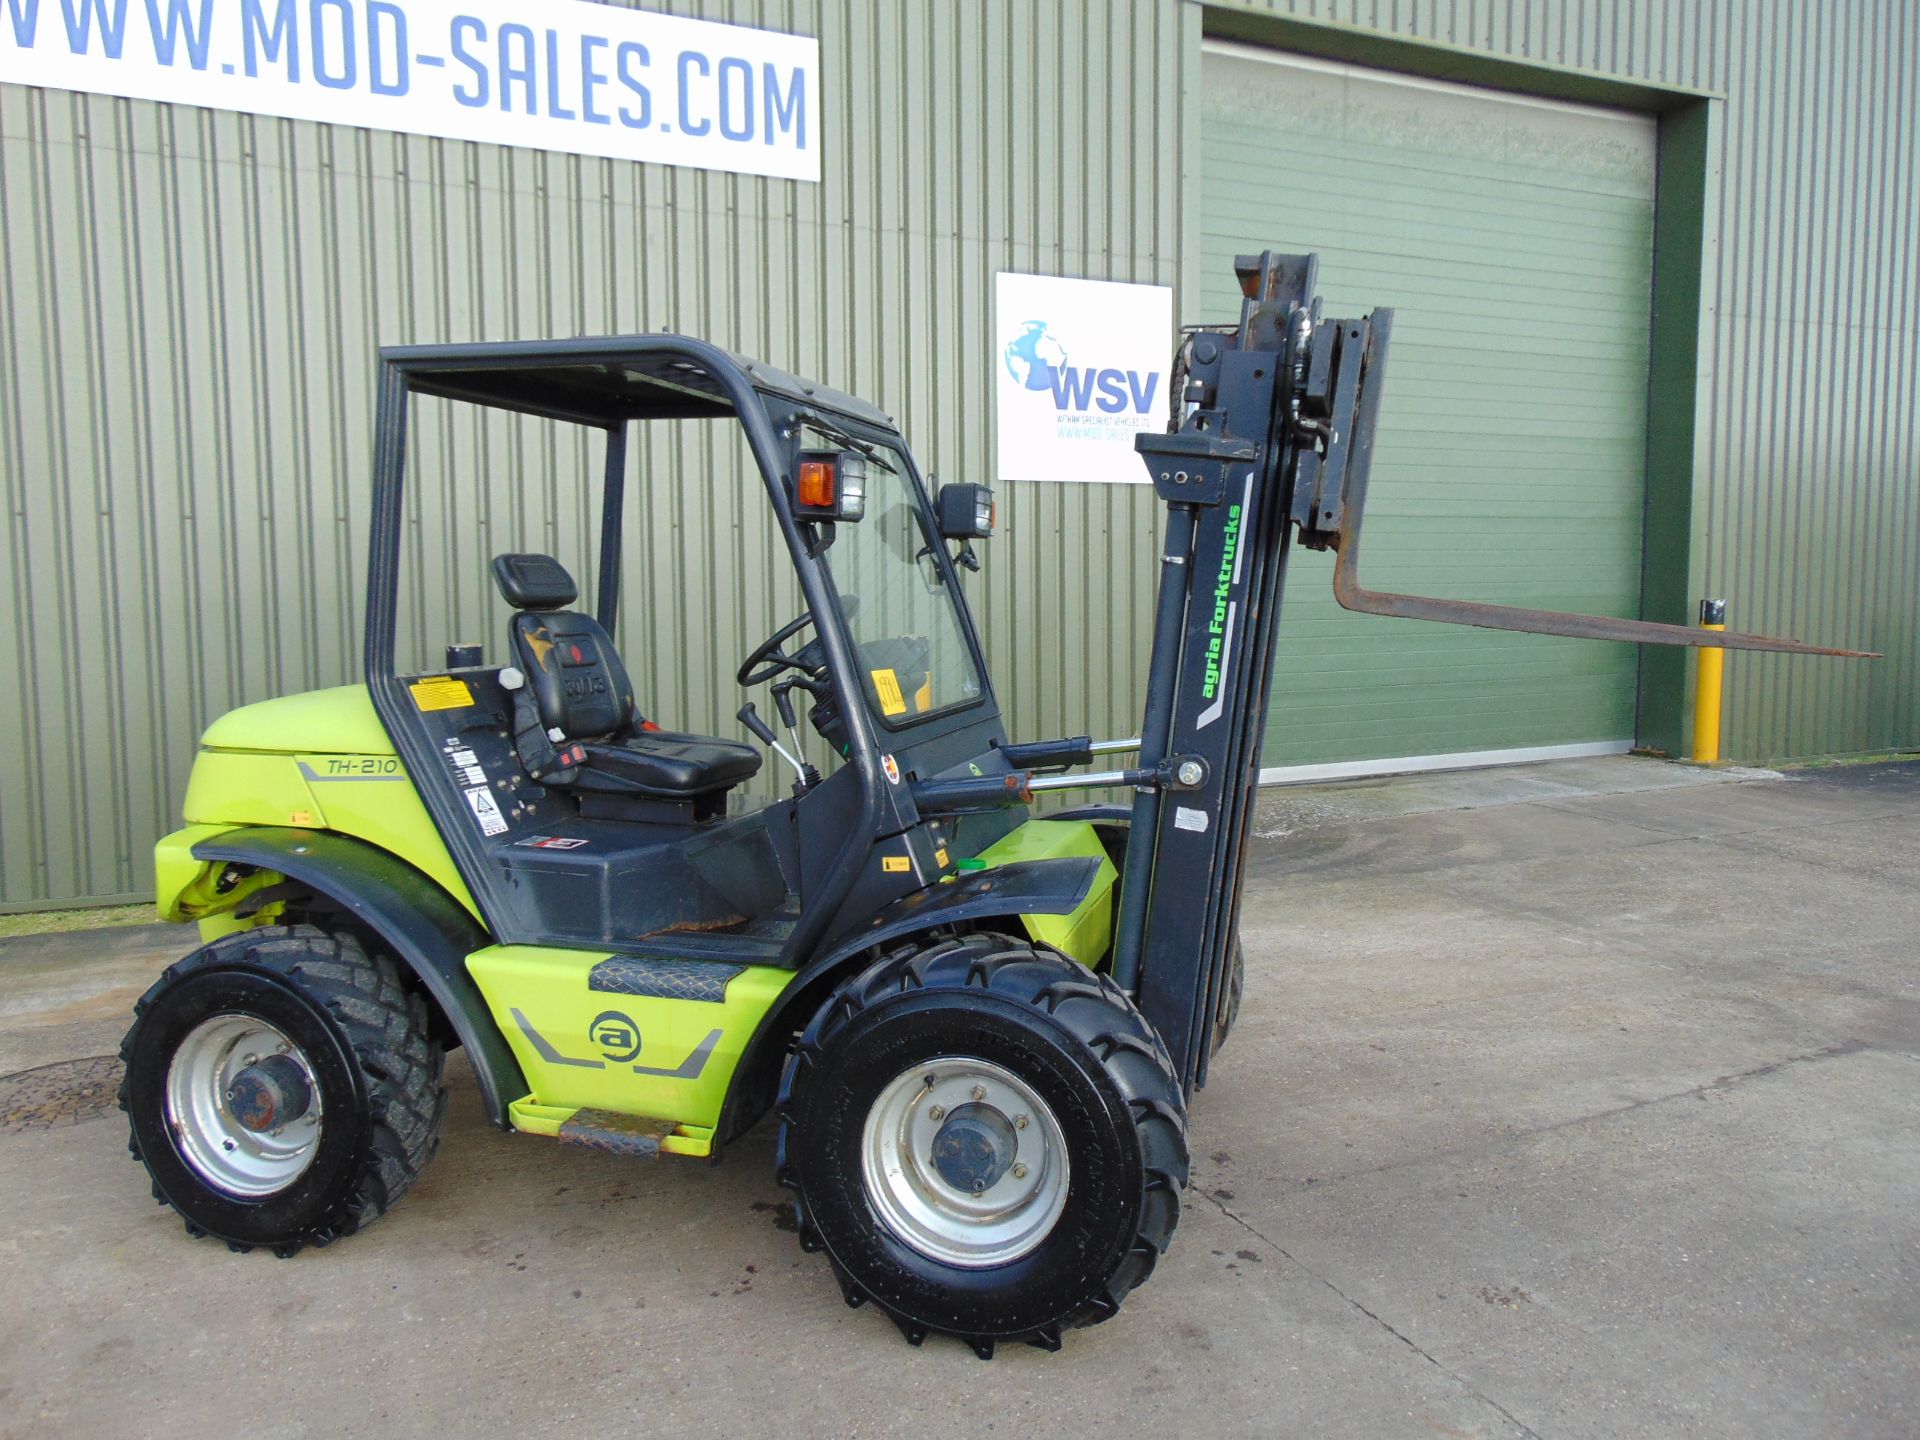 2011 Agrimac Agria TH210 Rough Terrain Diesel Forklift ONLY 1,918 HOURS! - Image 10 of 29